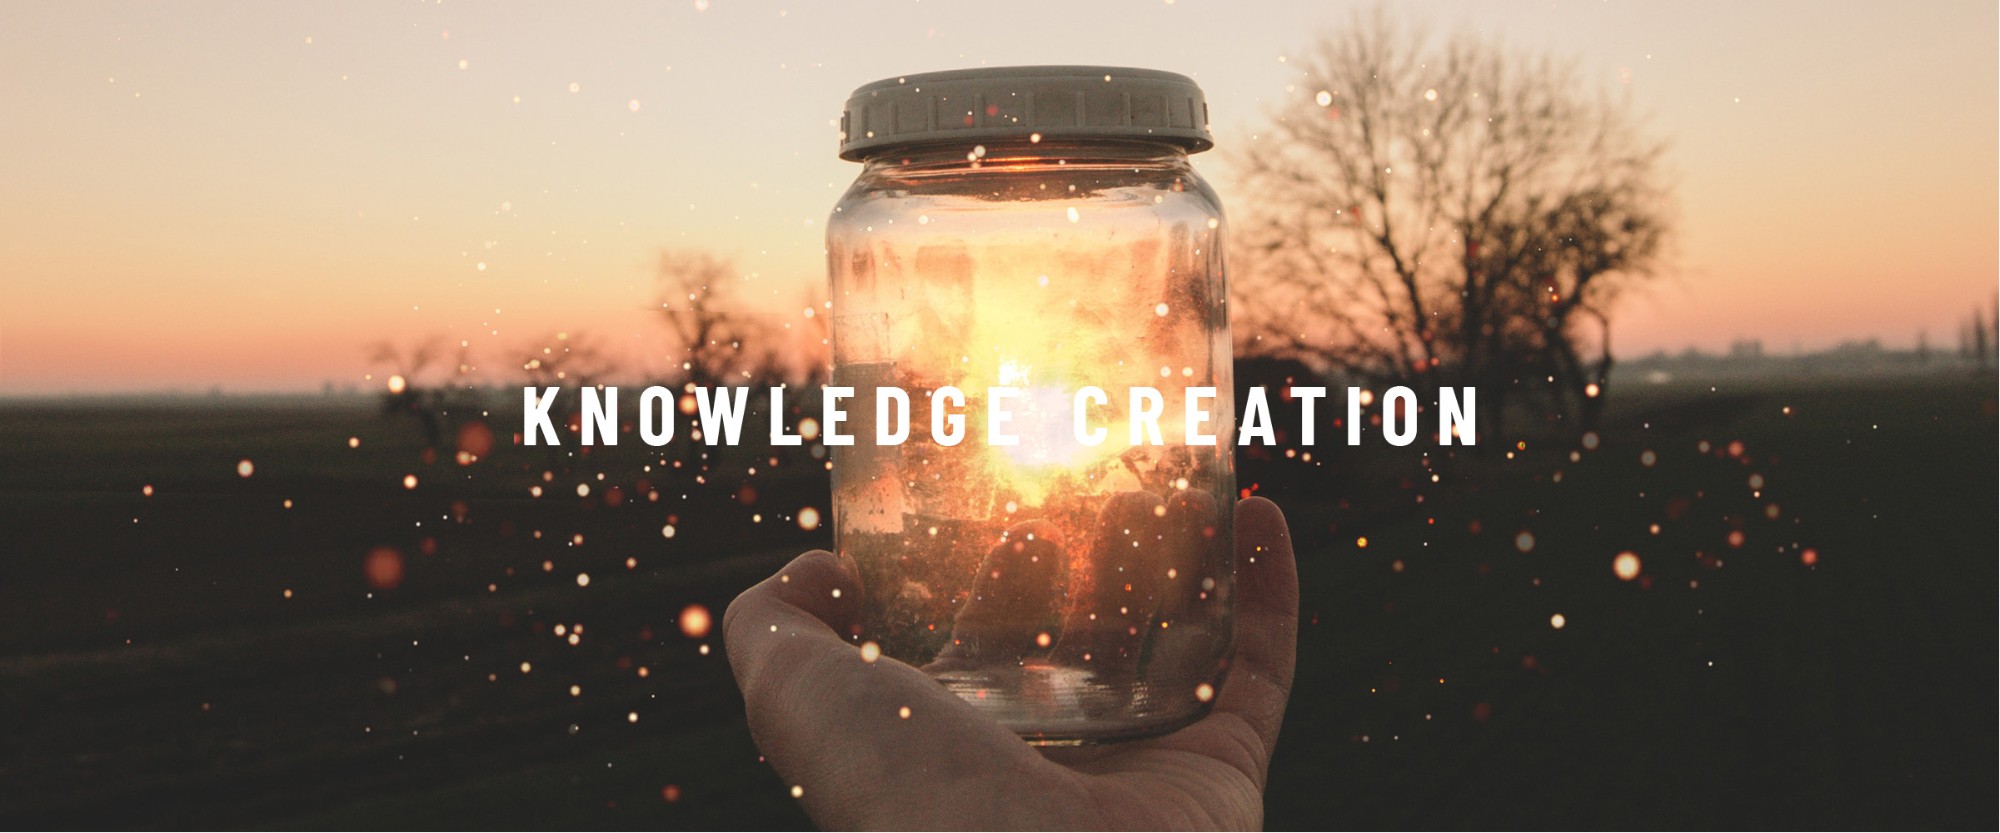 Image: Hand holding a jar of lights Text: Knowledge creation